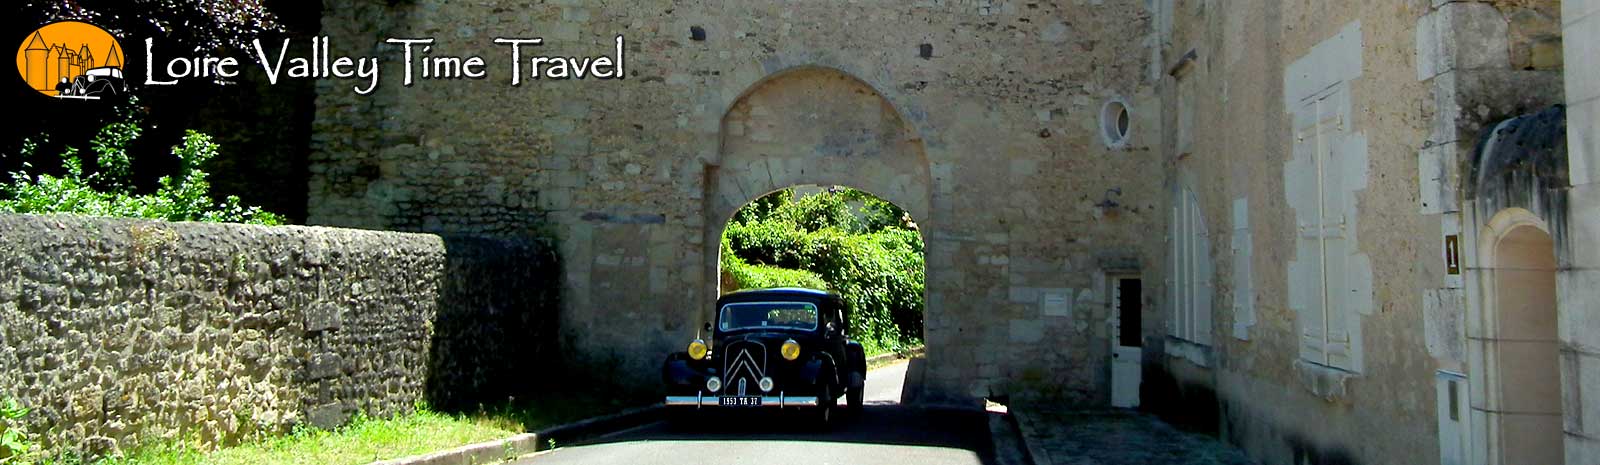 Loire Valley Time Travel private tours